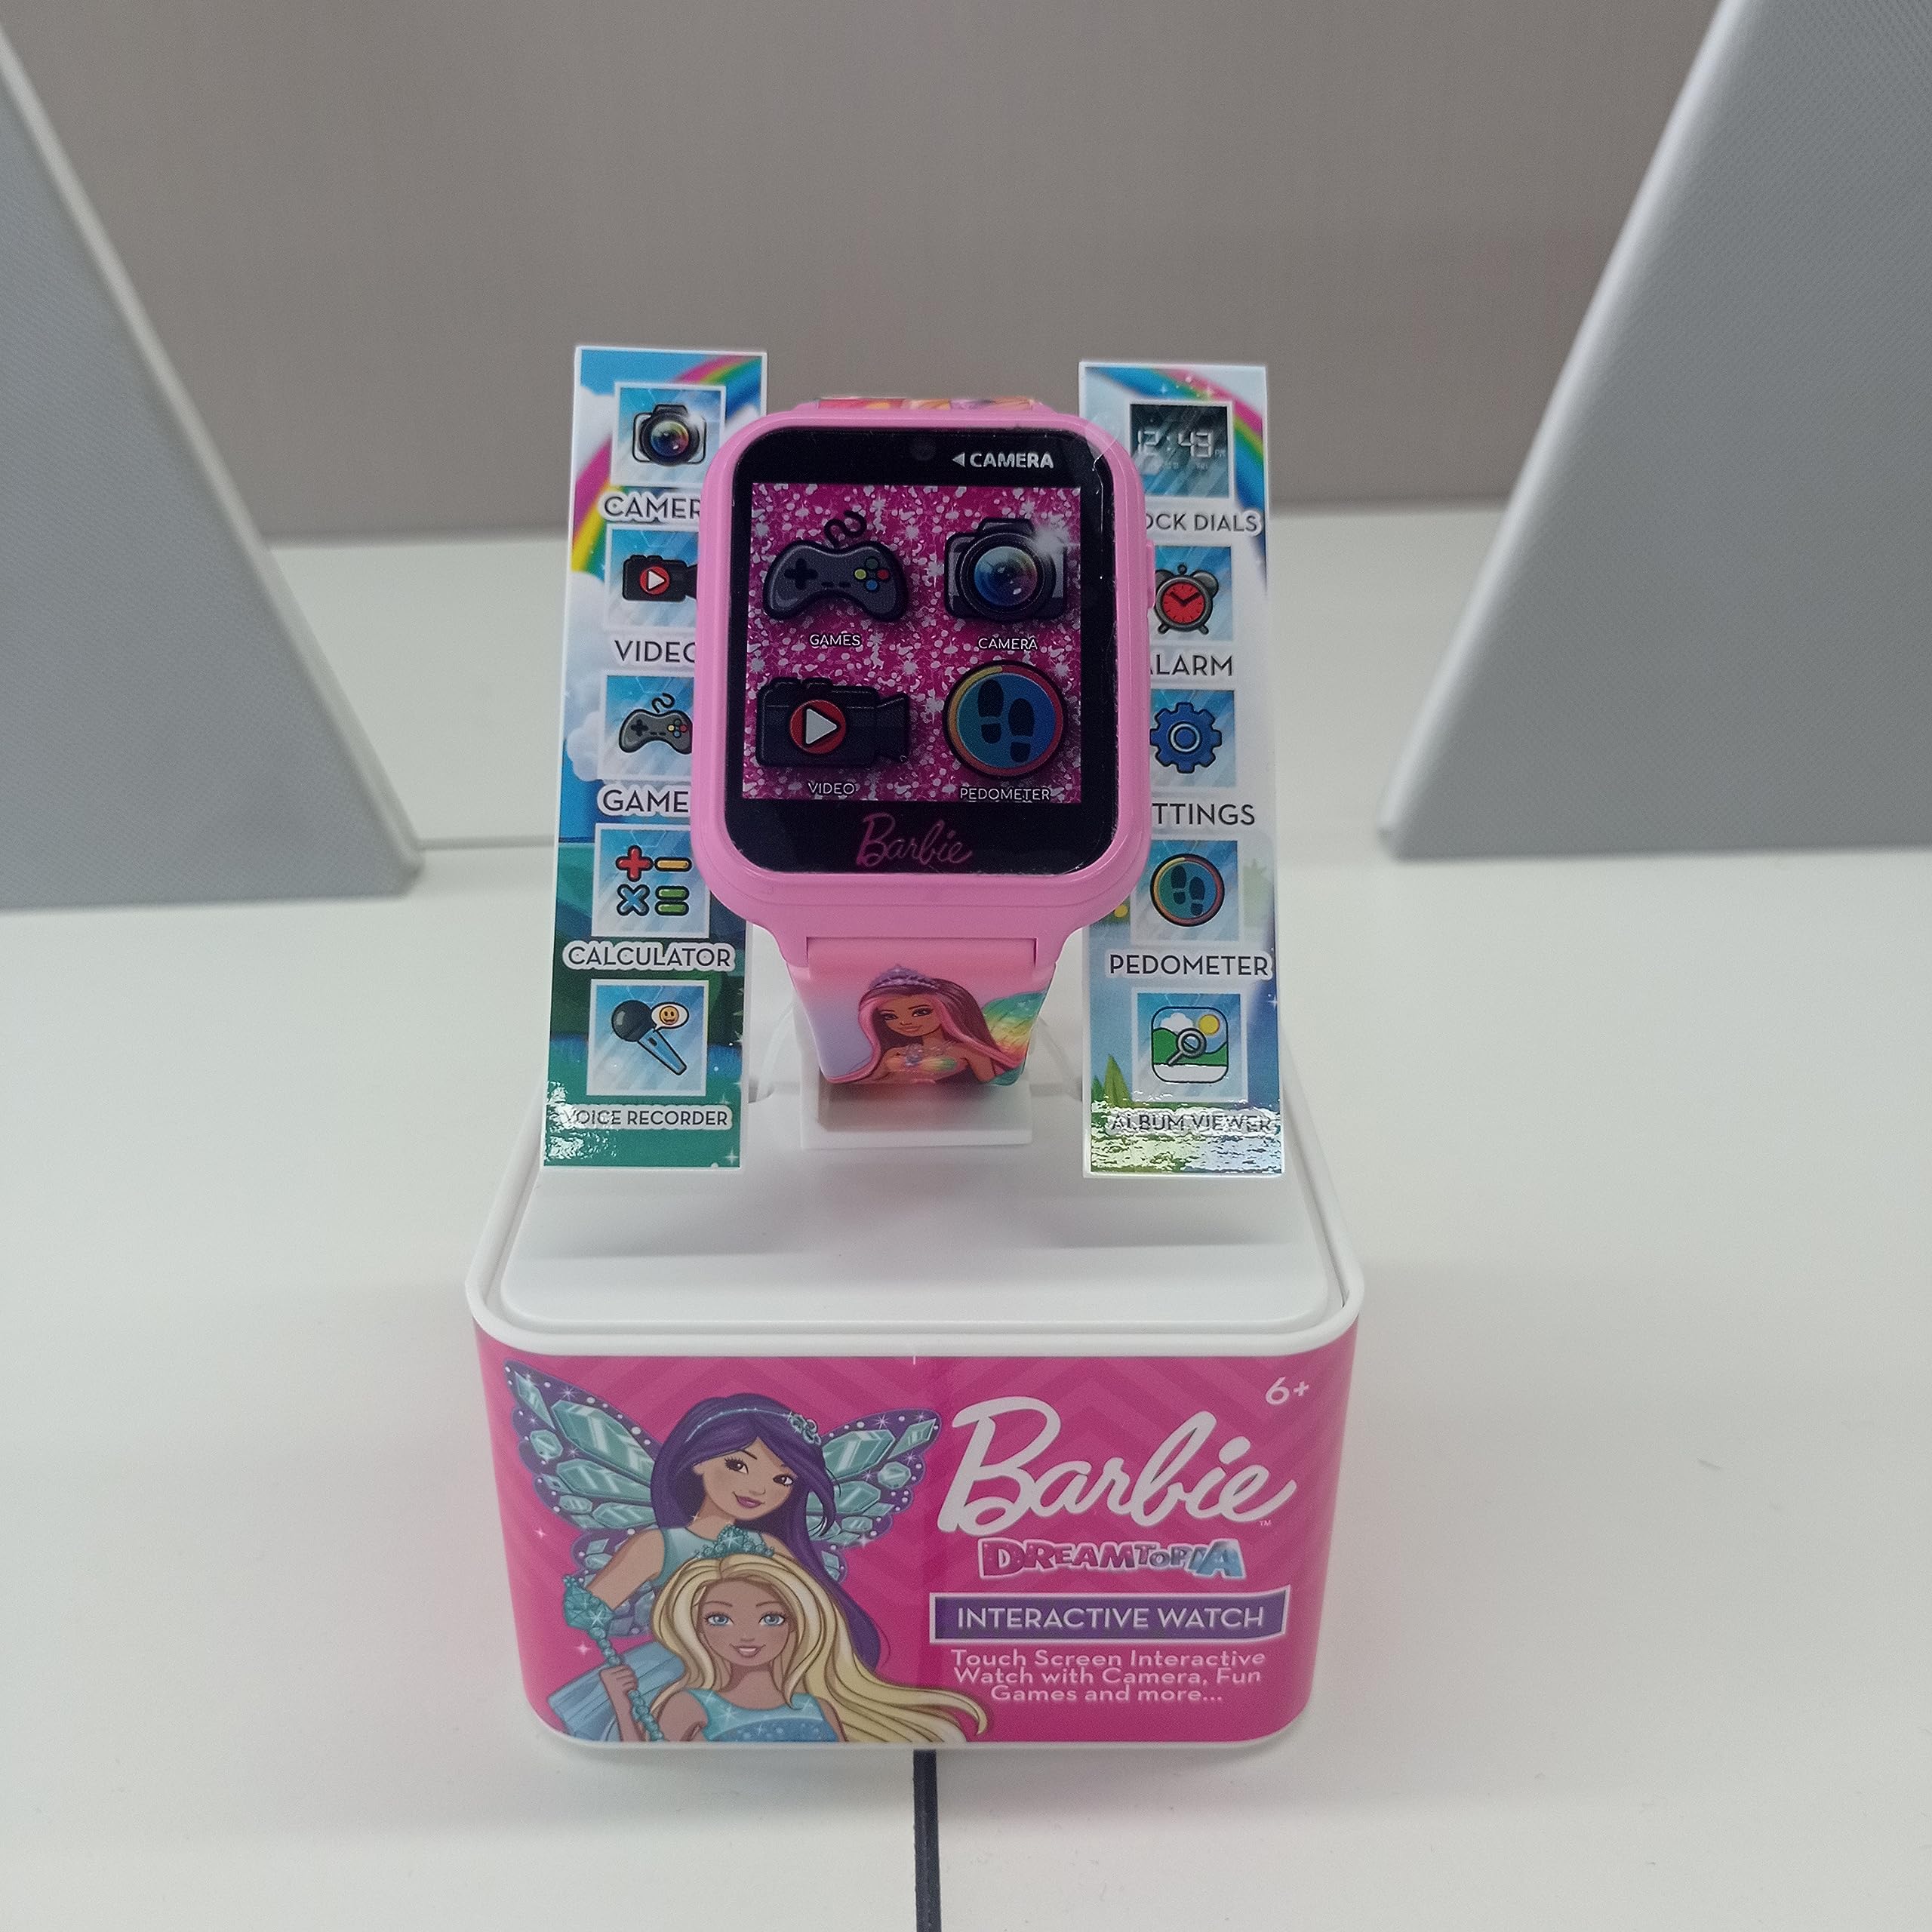 Accutime Barbie Pink Educational Learning Touchscreen Kids Smart Watch - Toy for Girls, Boys, Toddlers - Selfie Cam, Learning Games, Alarm, Calculator, Pedometer & More (Model: BAB4075AZ)